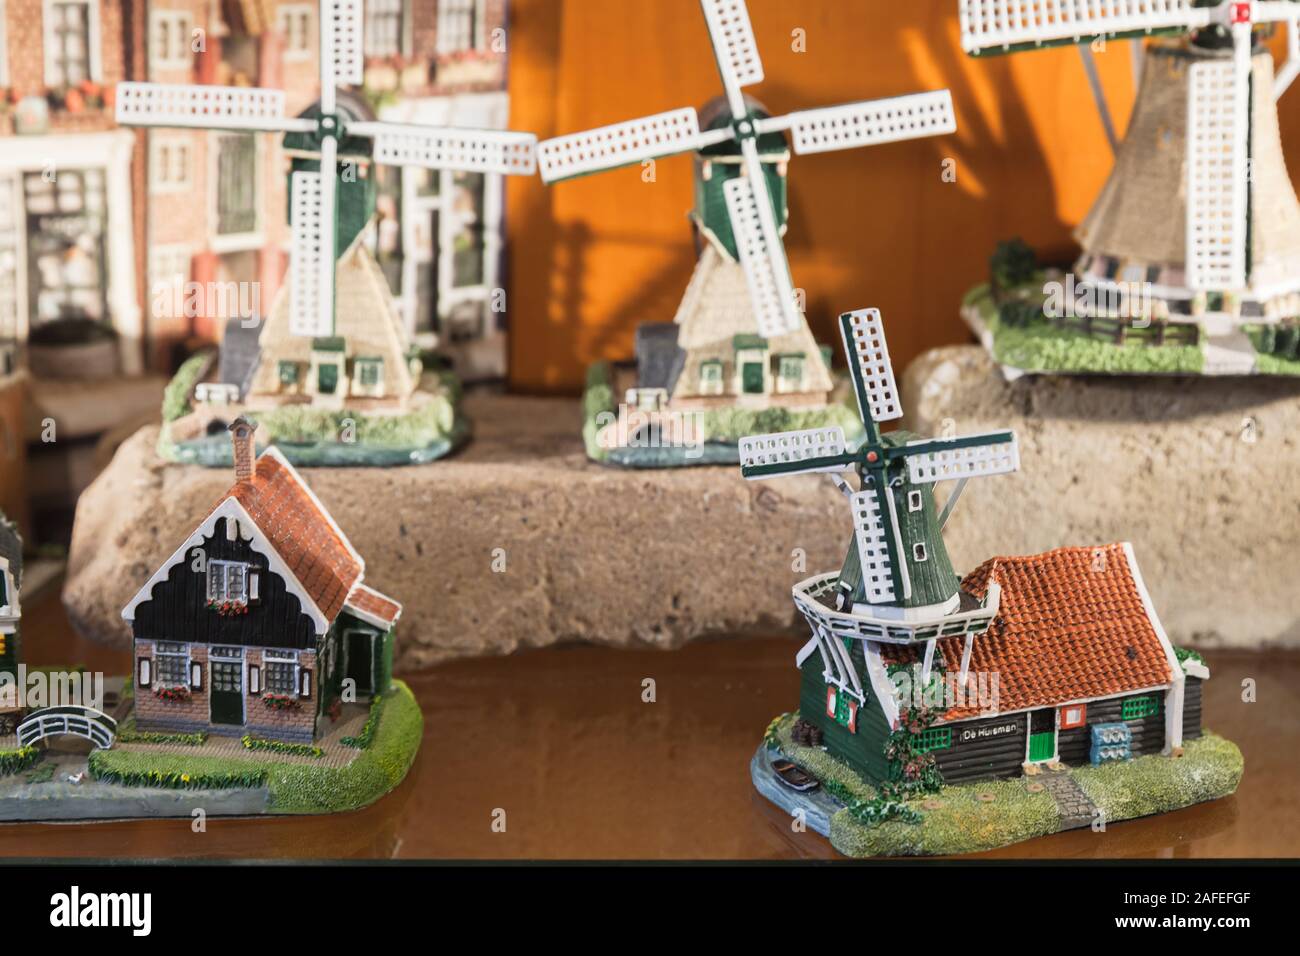 Amsterdam, Netherlands - February 25, 2017: Miniature windmills and houses, souvenirs of Amsterdam stand on a counter of gift shop Stock Photo